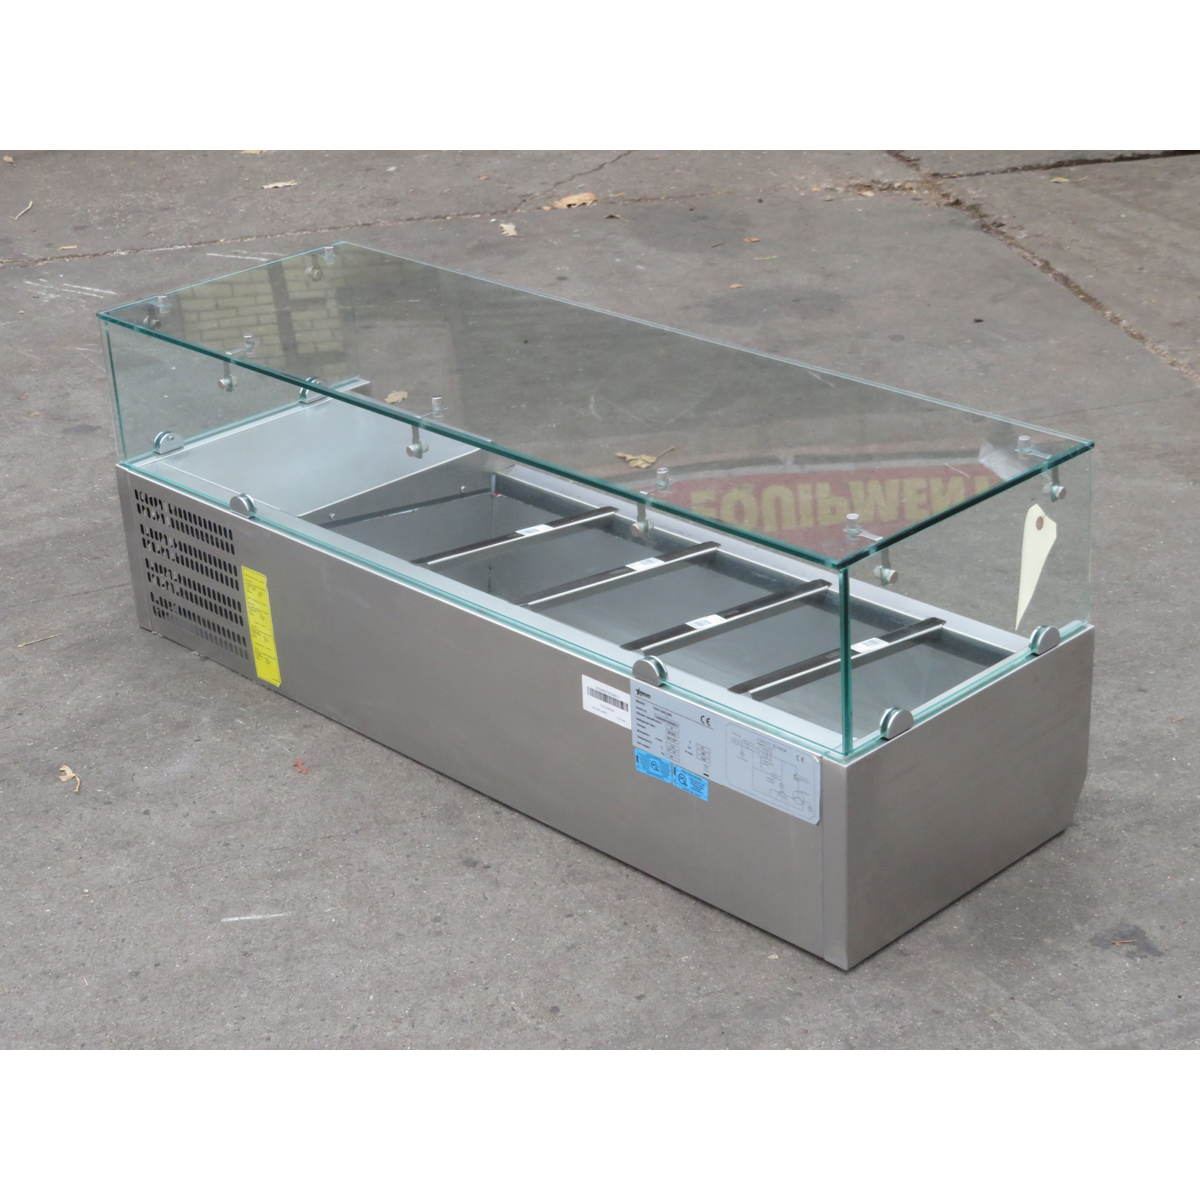 Omcan 40535 Salad Bar, Used Excellent Condition image 1